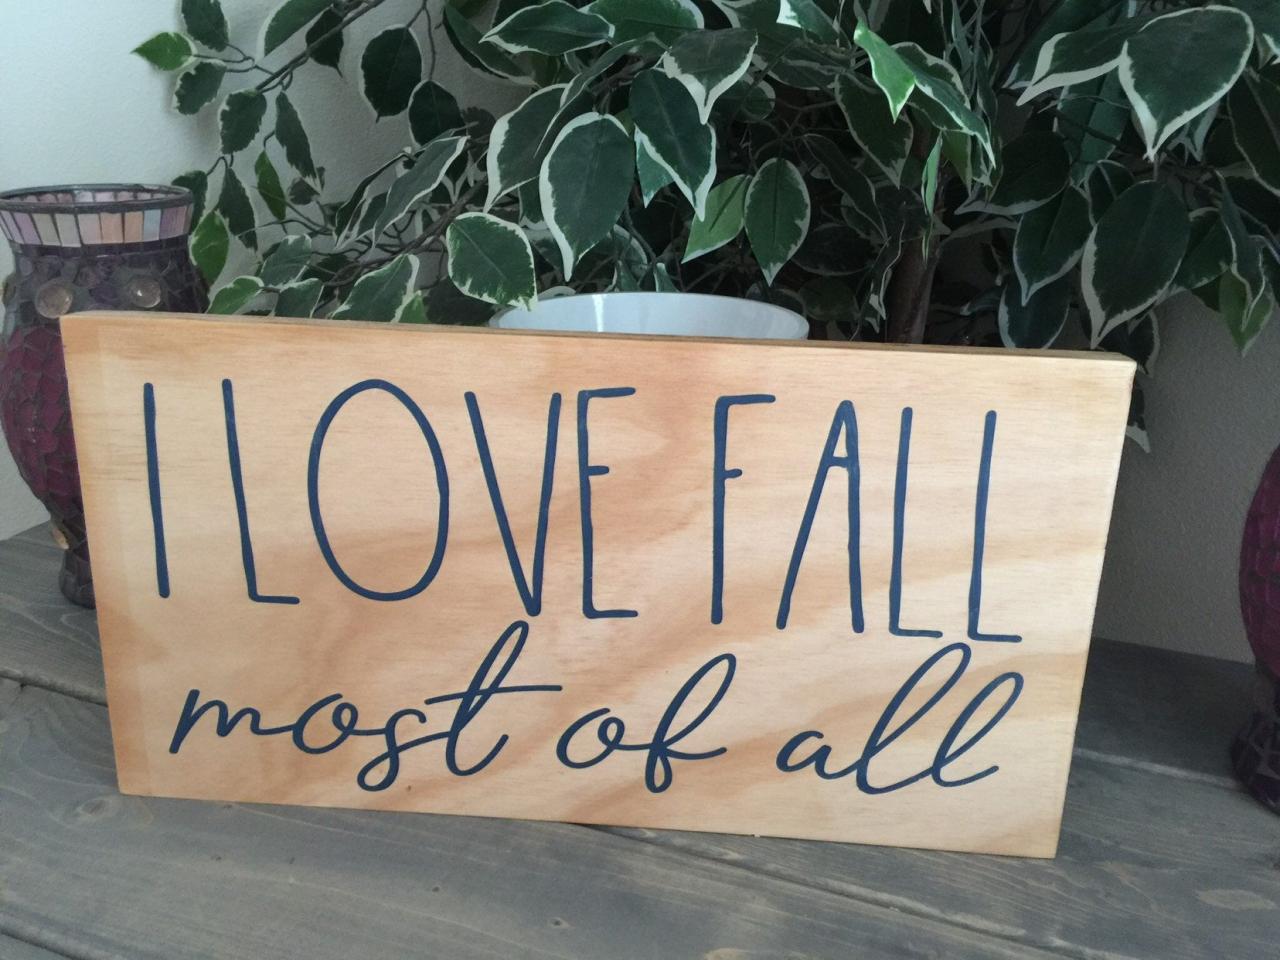 I love fall most of all 8x15 hand painted wood sign. Shelf sitter. Fall home decor.